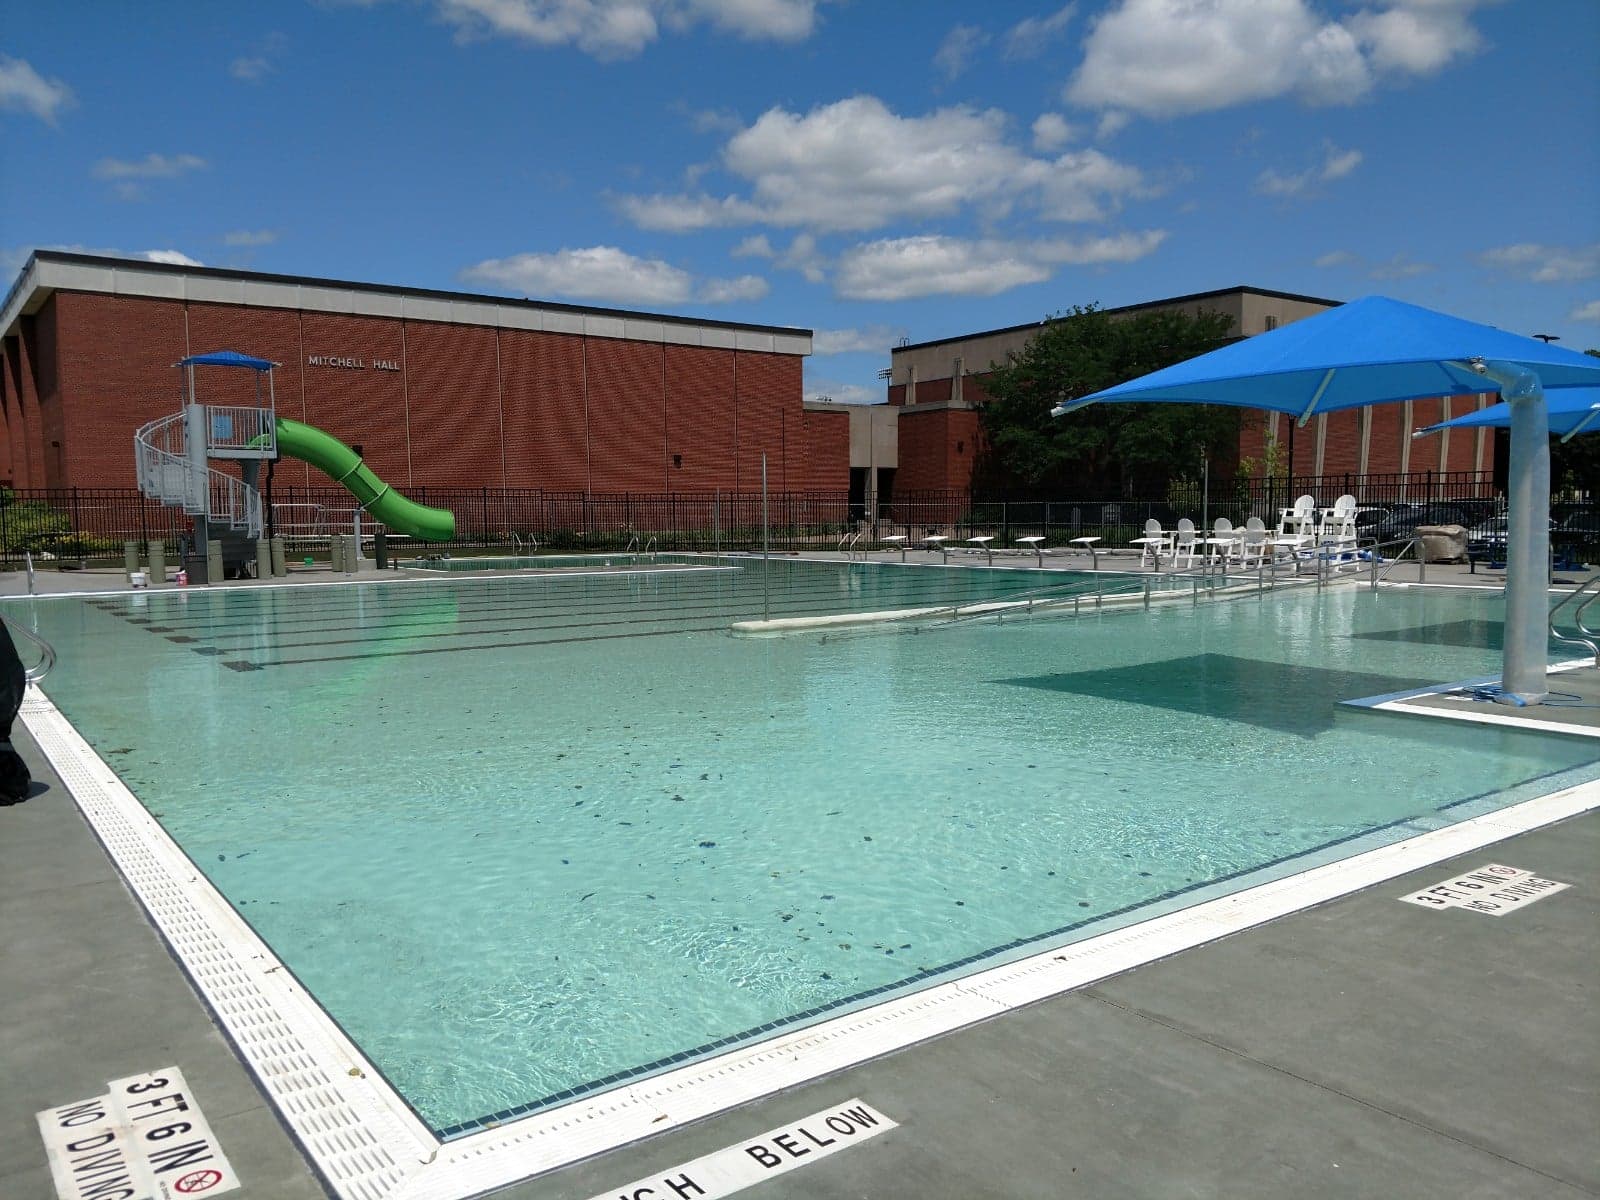 US communities face tough choices on opening public pools